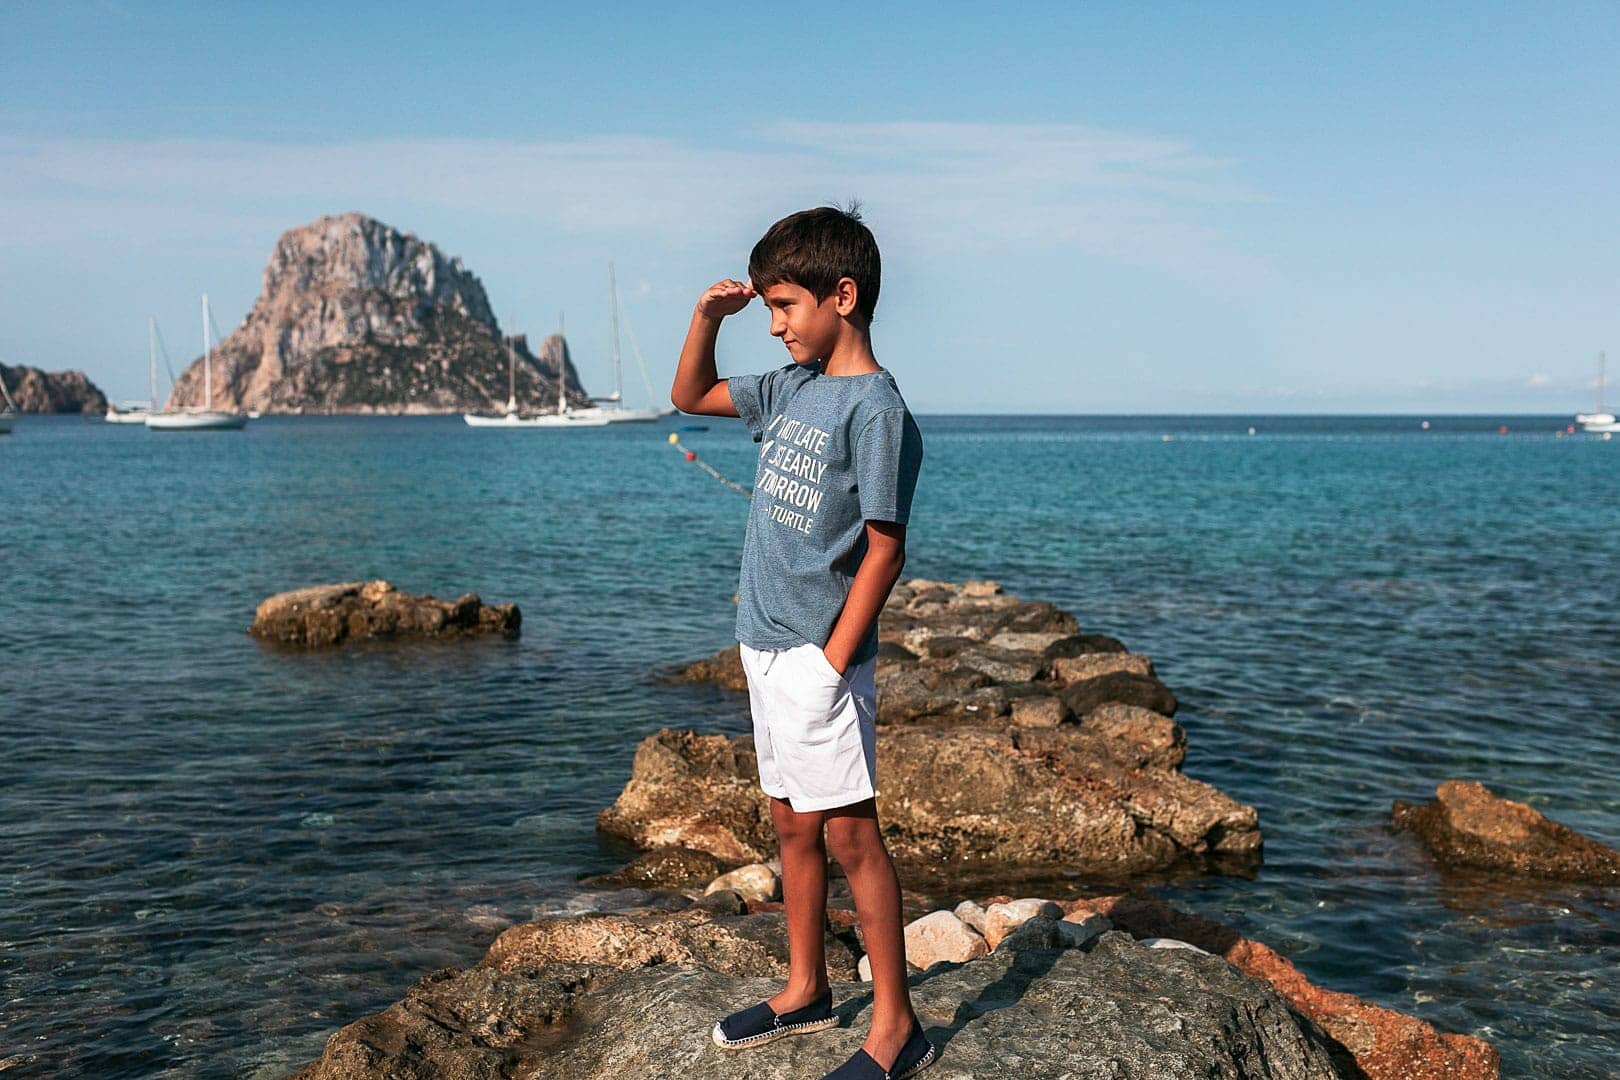 Photograph of a boy posing on the rocks of the Dort cove in the morning